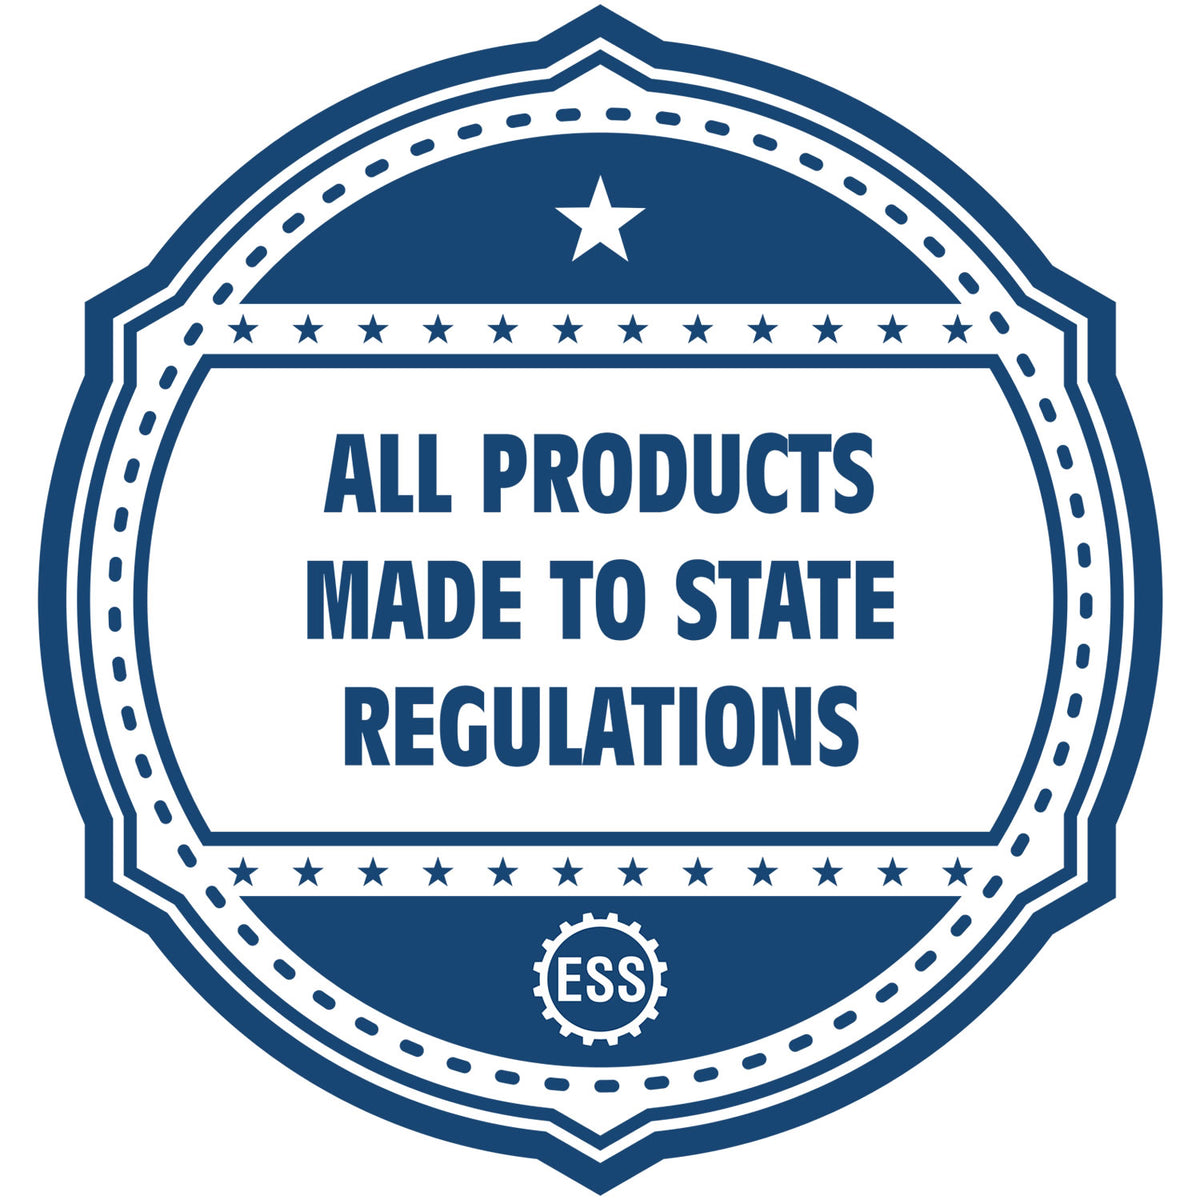 An icon or badge element for the Extended Long Reach Kansas Architect Seal Embosser showing that this product is made in compliance with state regulations.